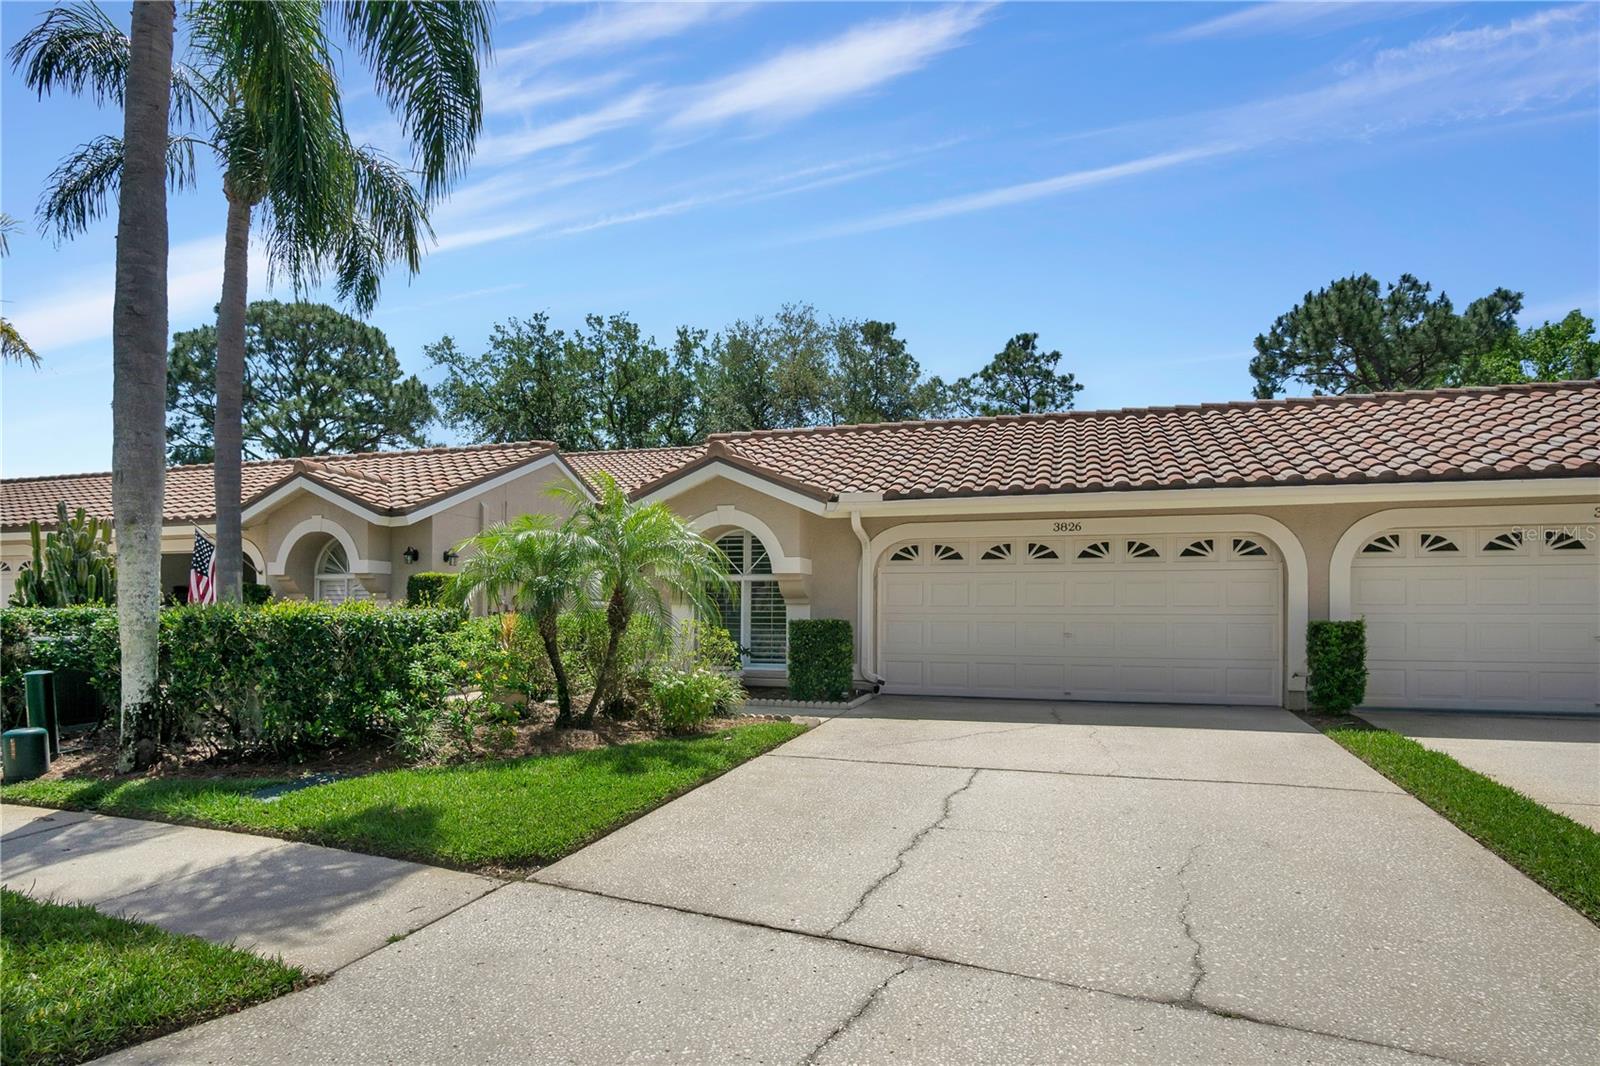 Photo one of 3826 Muirfield Ct Palm Harbor FL 34685 | MLS A4606062